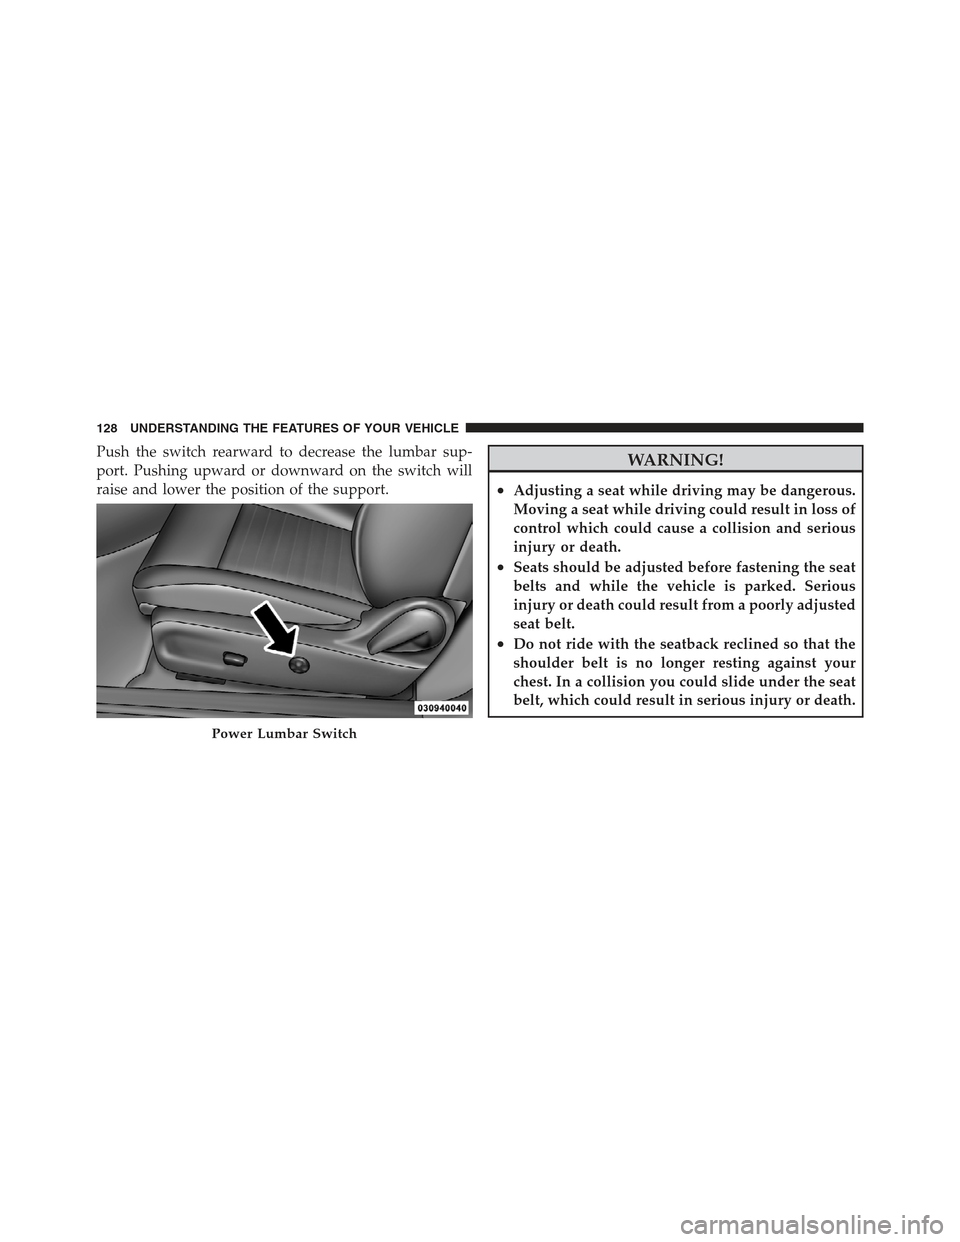 DODGE CHALLENGER 2012 3.G Service Manual Push the switch rearward to decrease the lumbar sup-
port. Pushing upward or downward on the switch will
raise and lower the position of the support.WARNING!
•Adjusting a seat while driving may be d